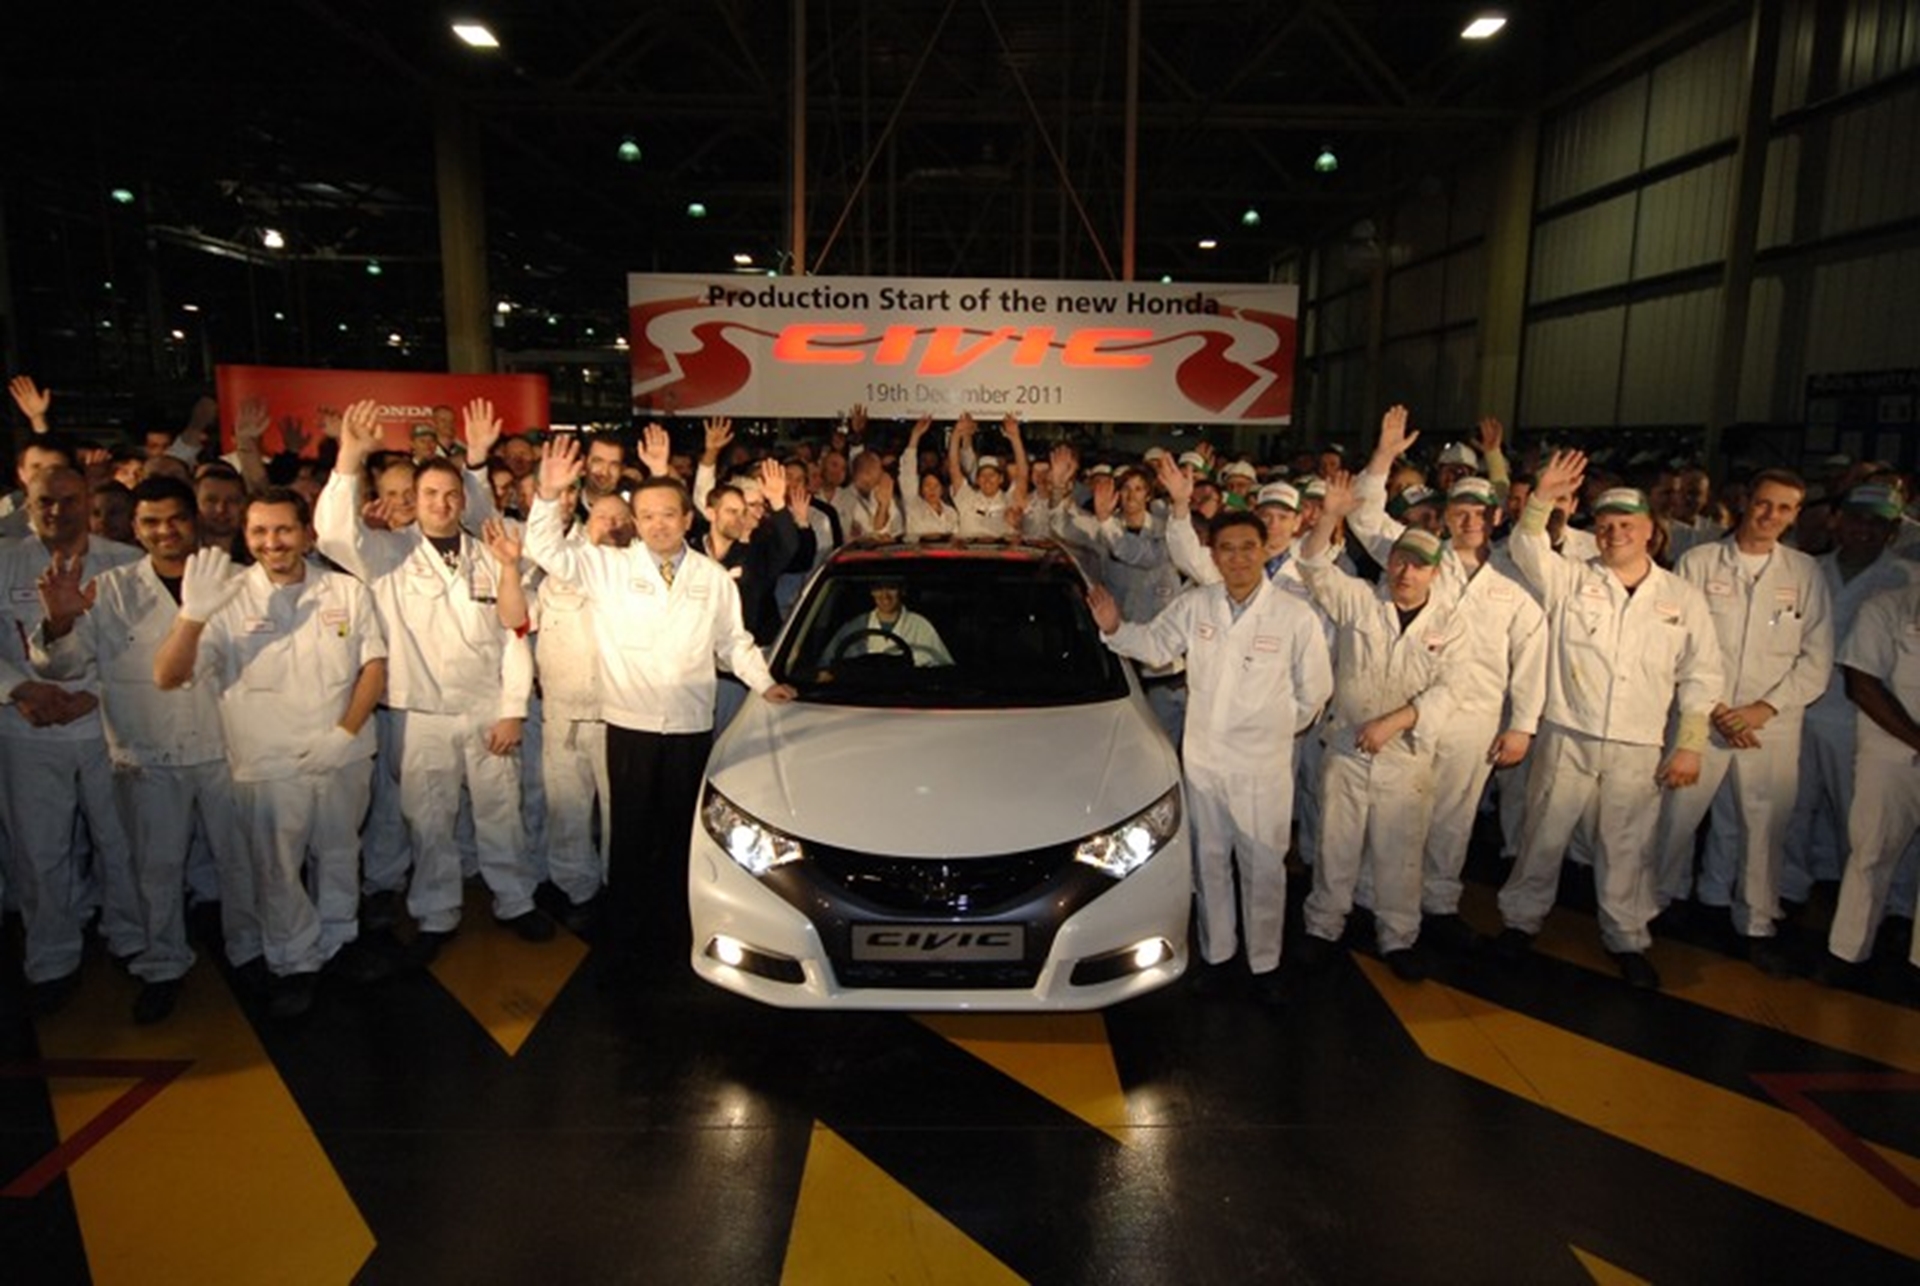 Honda celebrates the start of New Civic Production and announces 500 new jobs